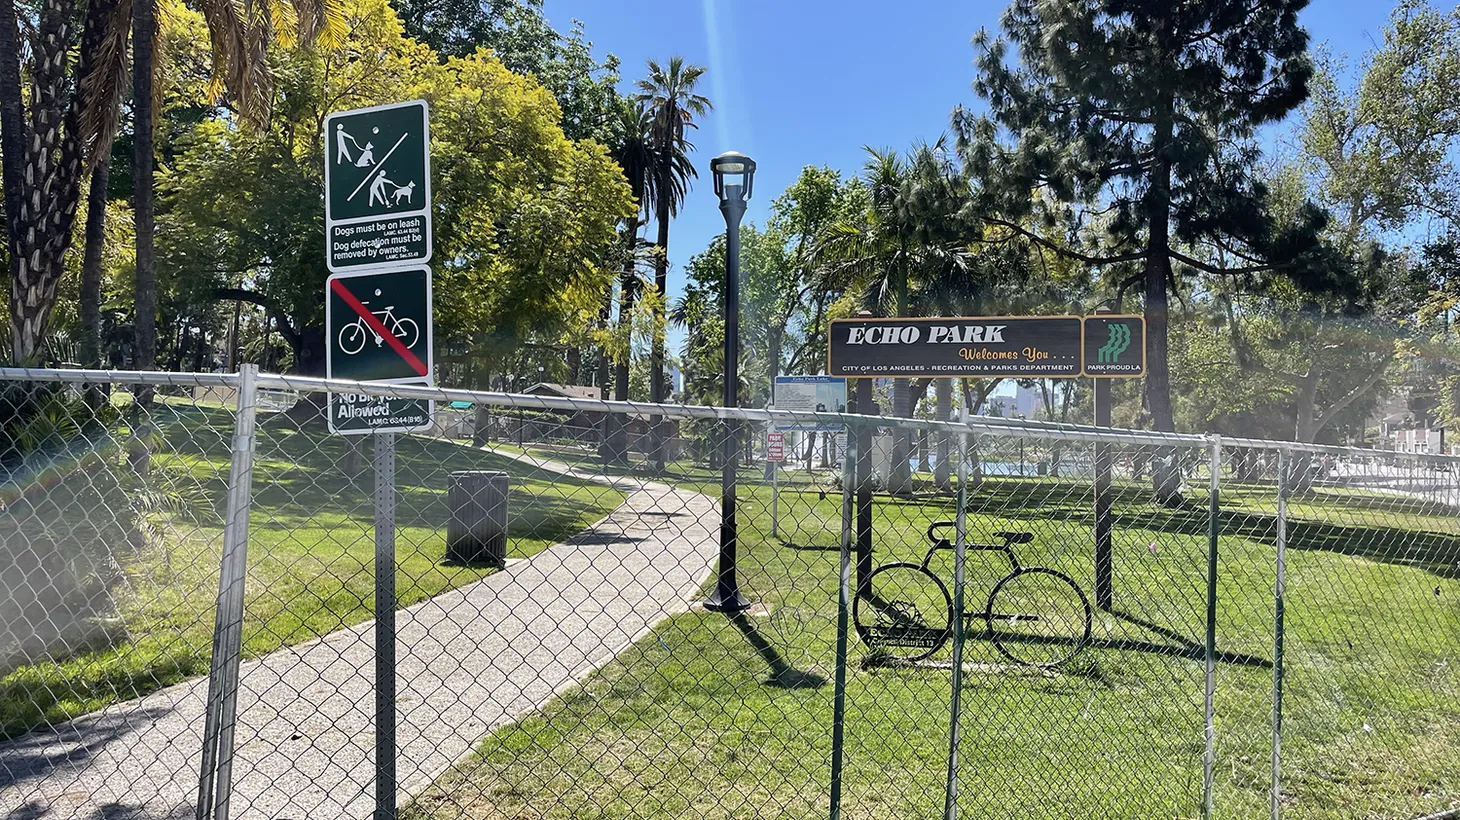 Echo Park Lake: Tall fences and no more homeless camps. Where are the  former residents now?